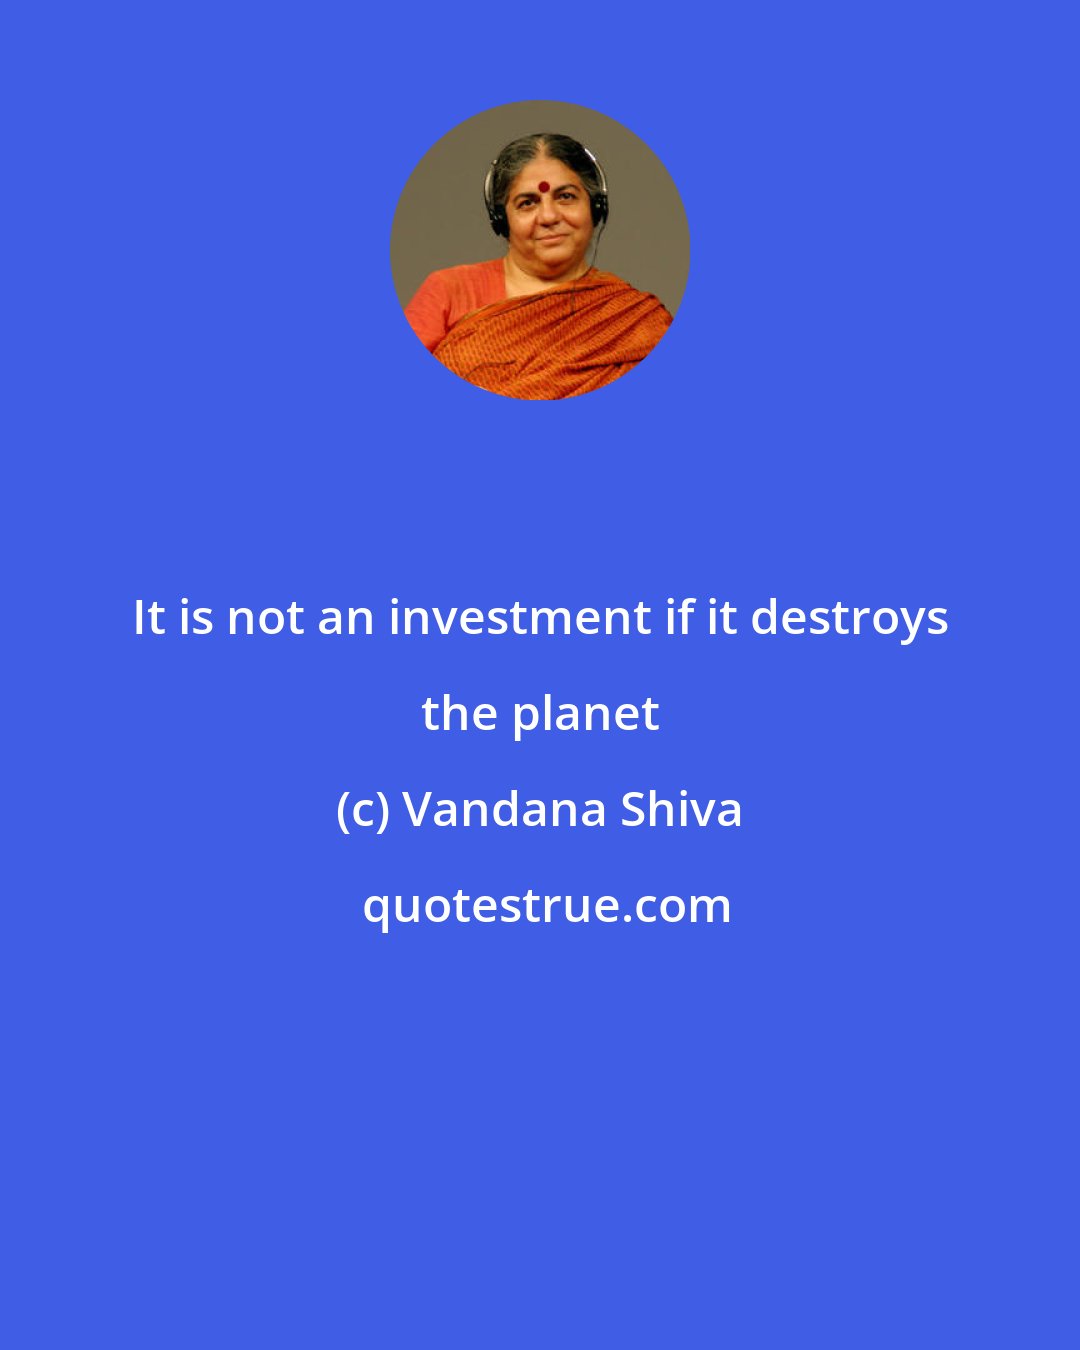 Vandana Shiva: It is not an investment if it destroys the planet